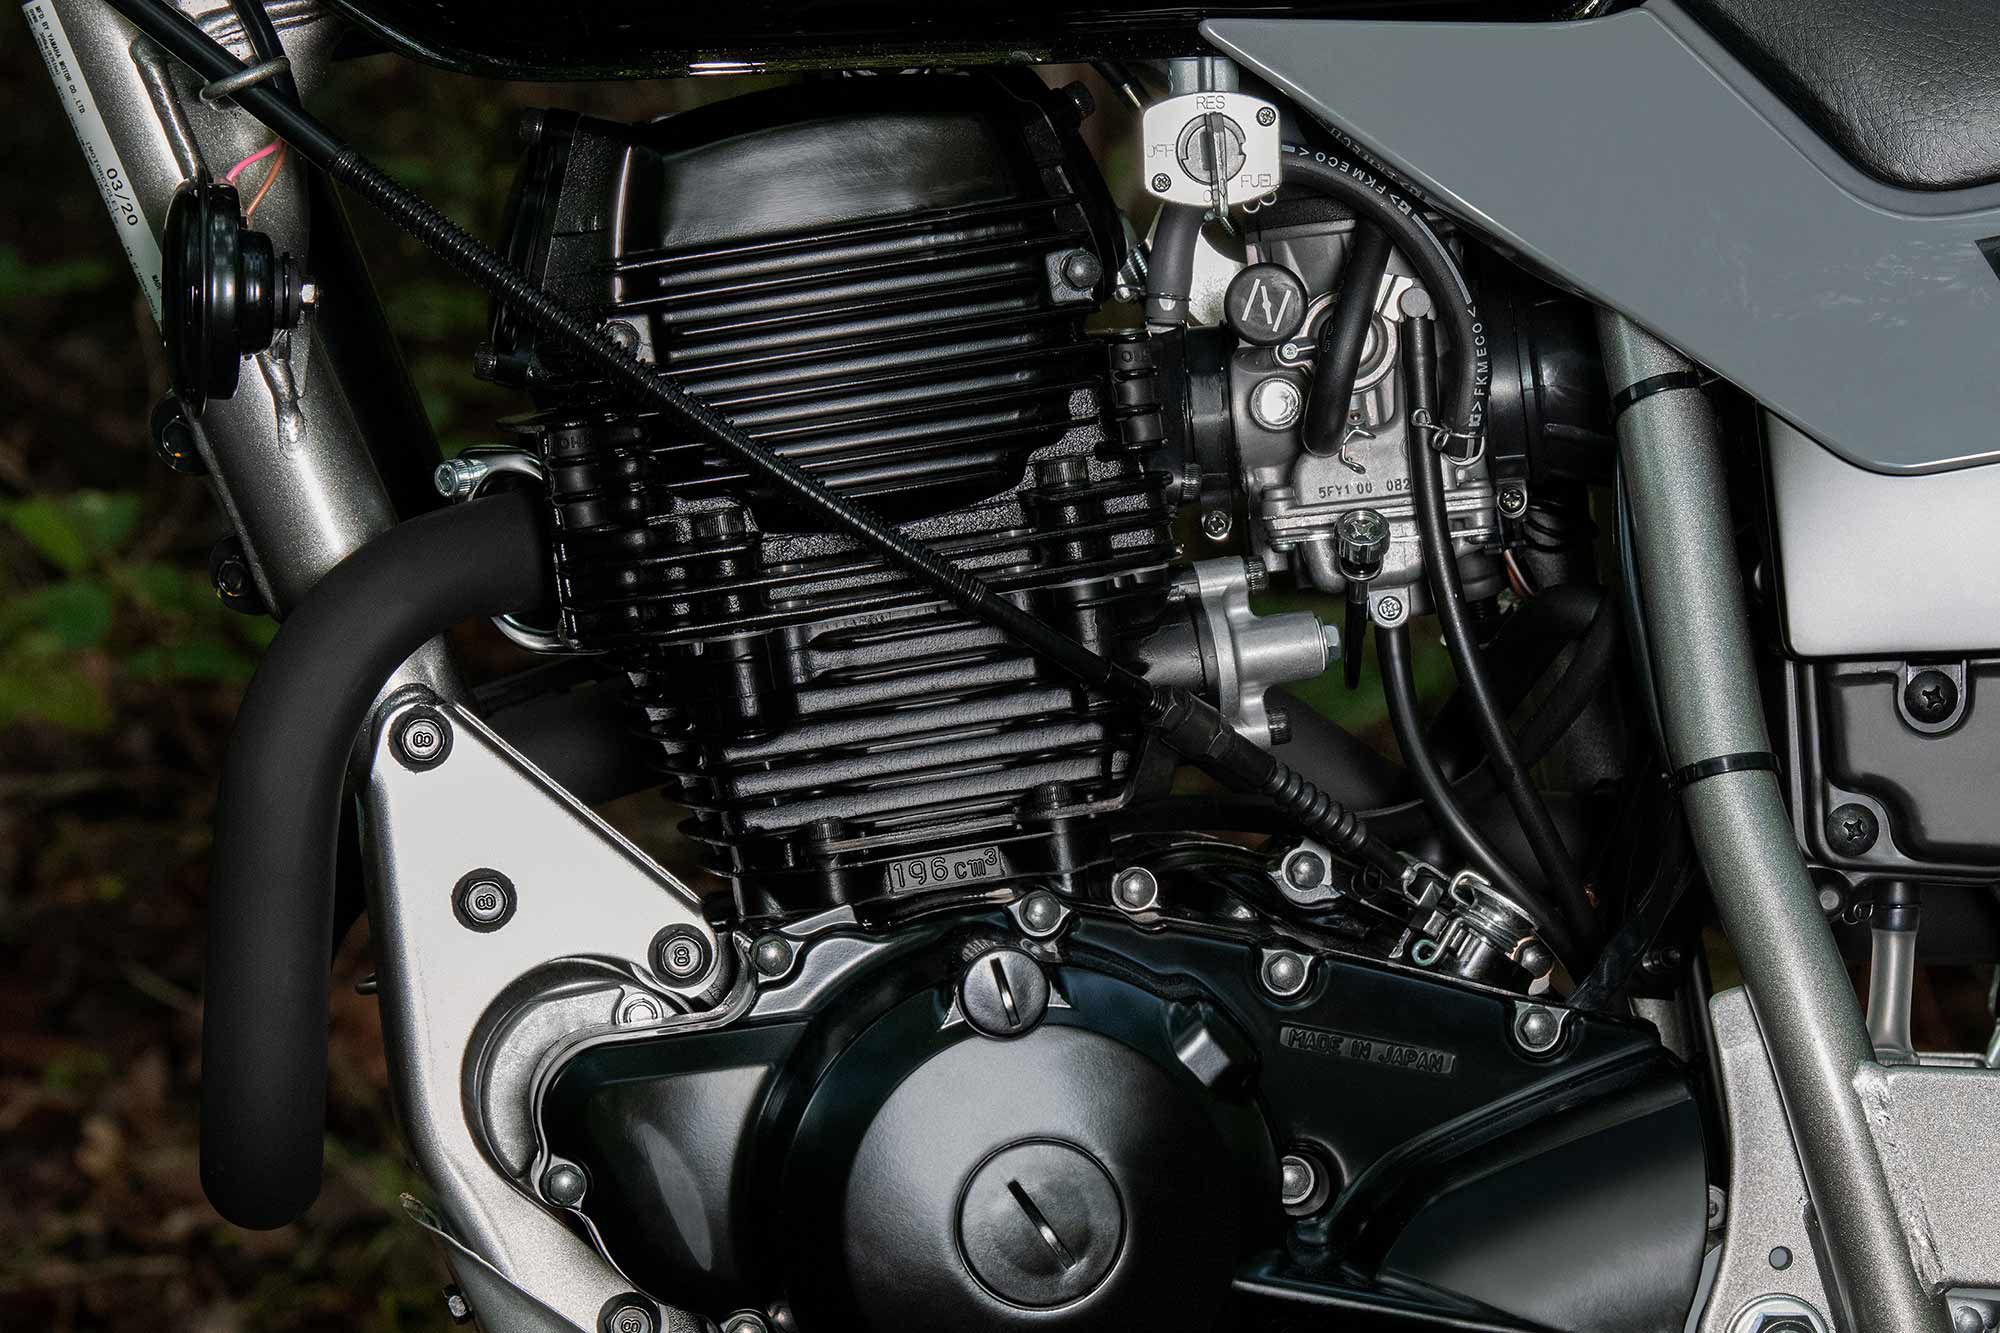 For those looking for fuel injection, your best bet is to look at Yamaha’s other dual sport, the XT250. The TW200’s engine has a Mikuni carb.